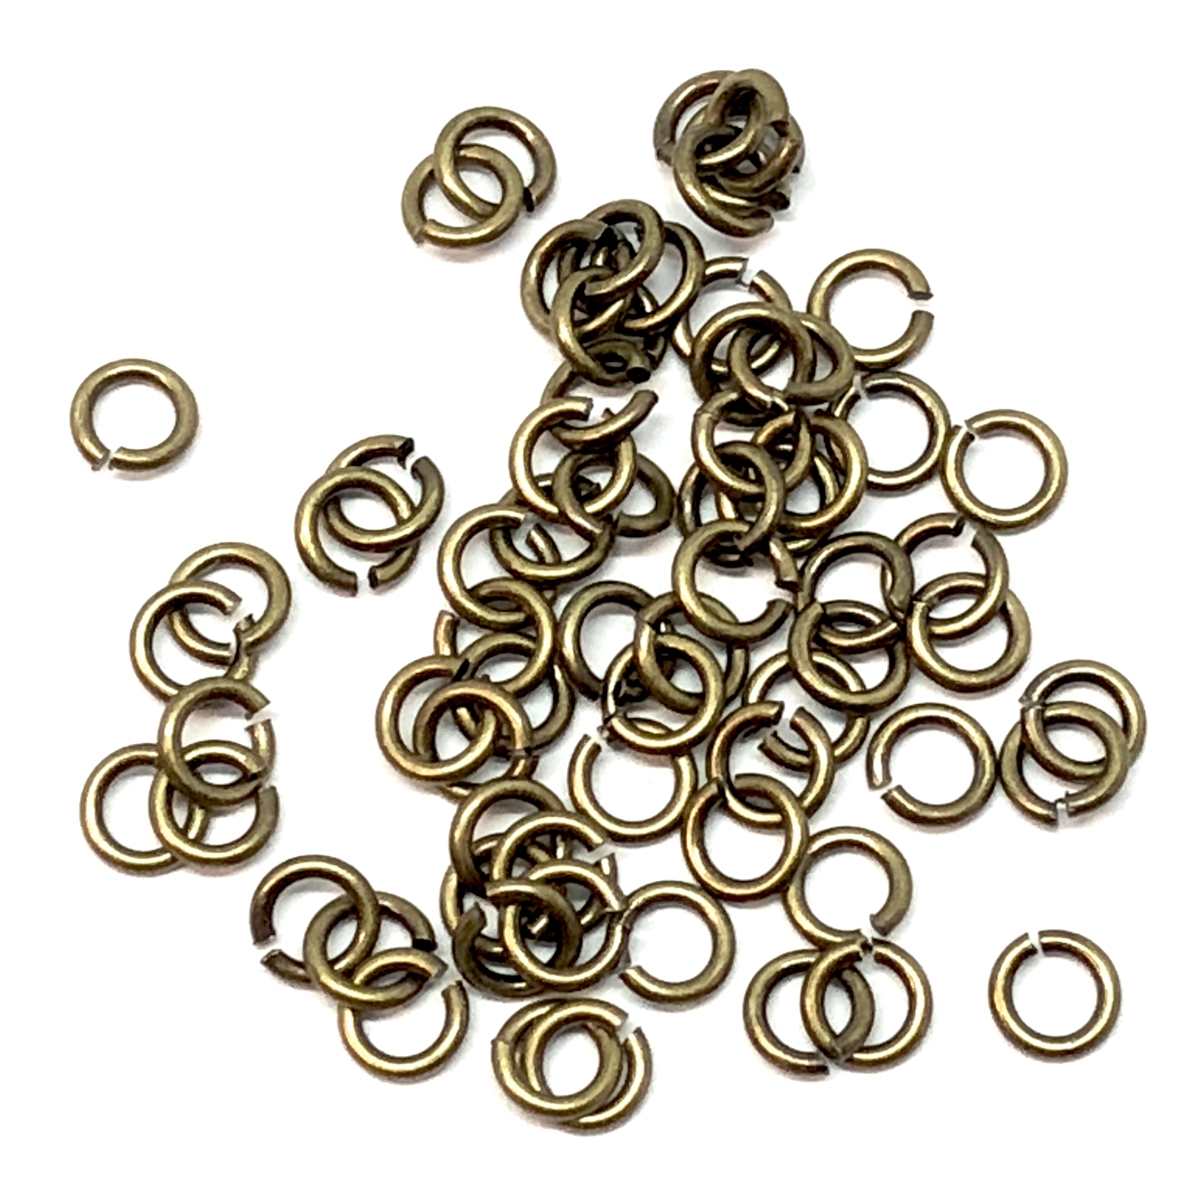 4mm 21 Gauge Open Jump Rings 22K Gold Plated (100)